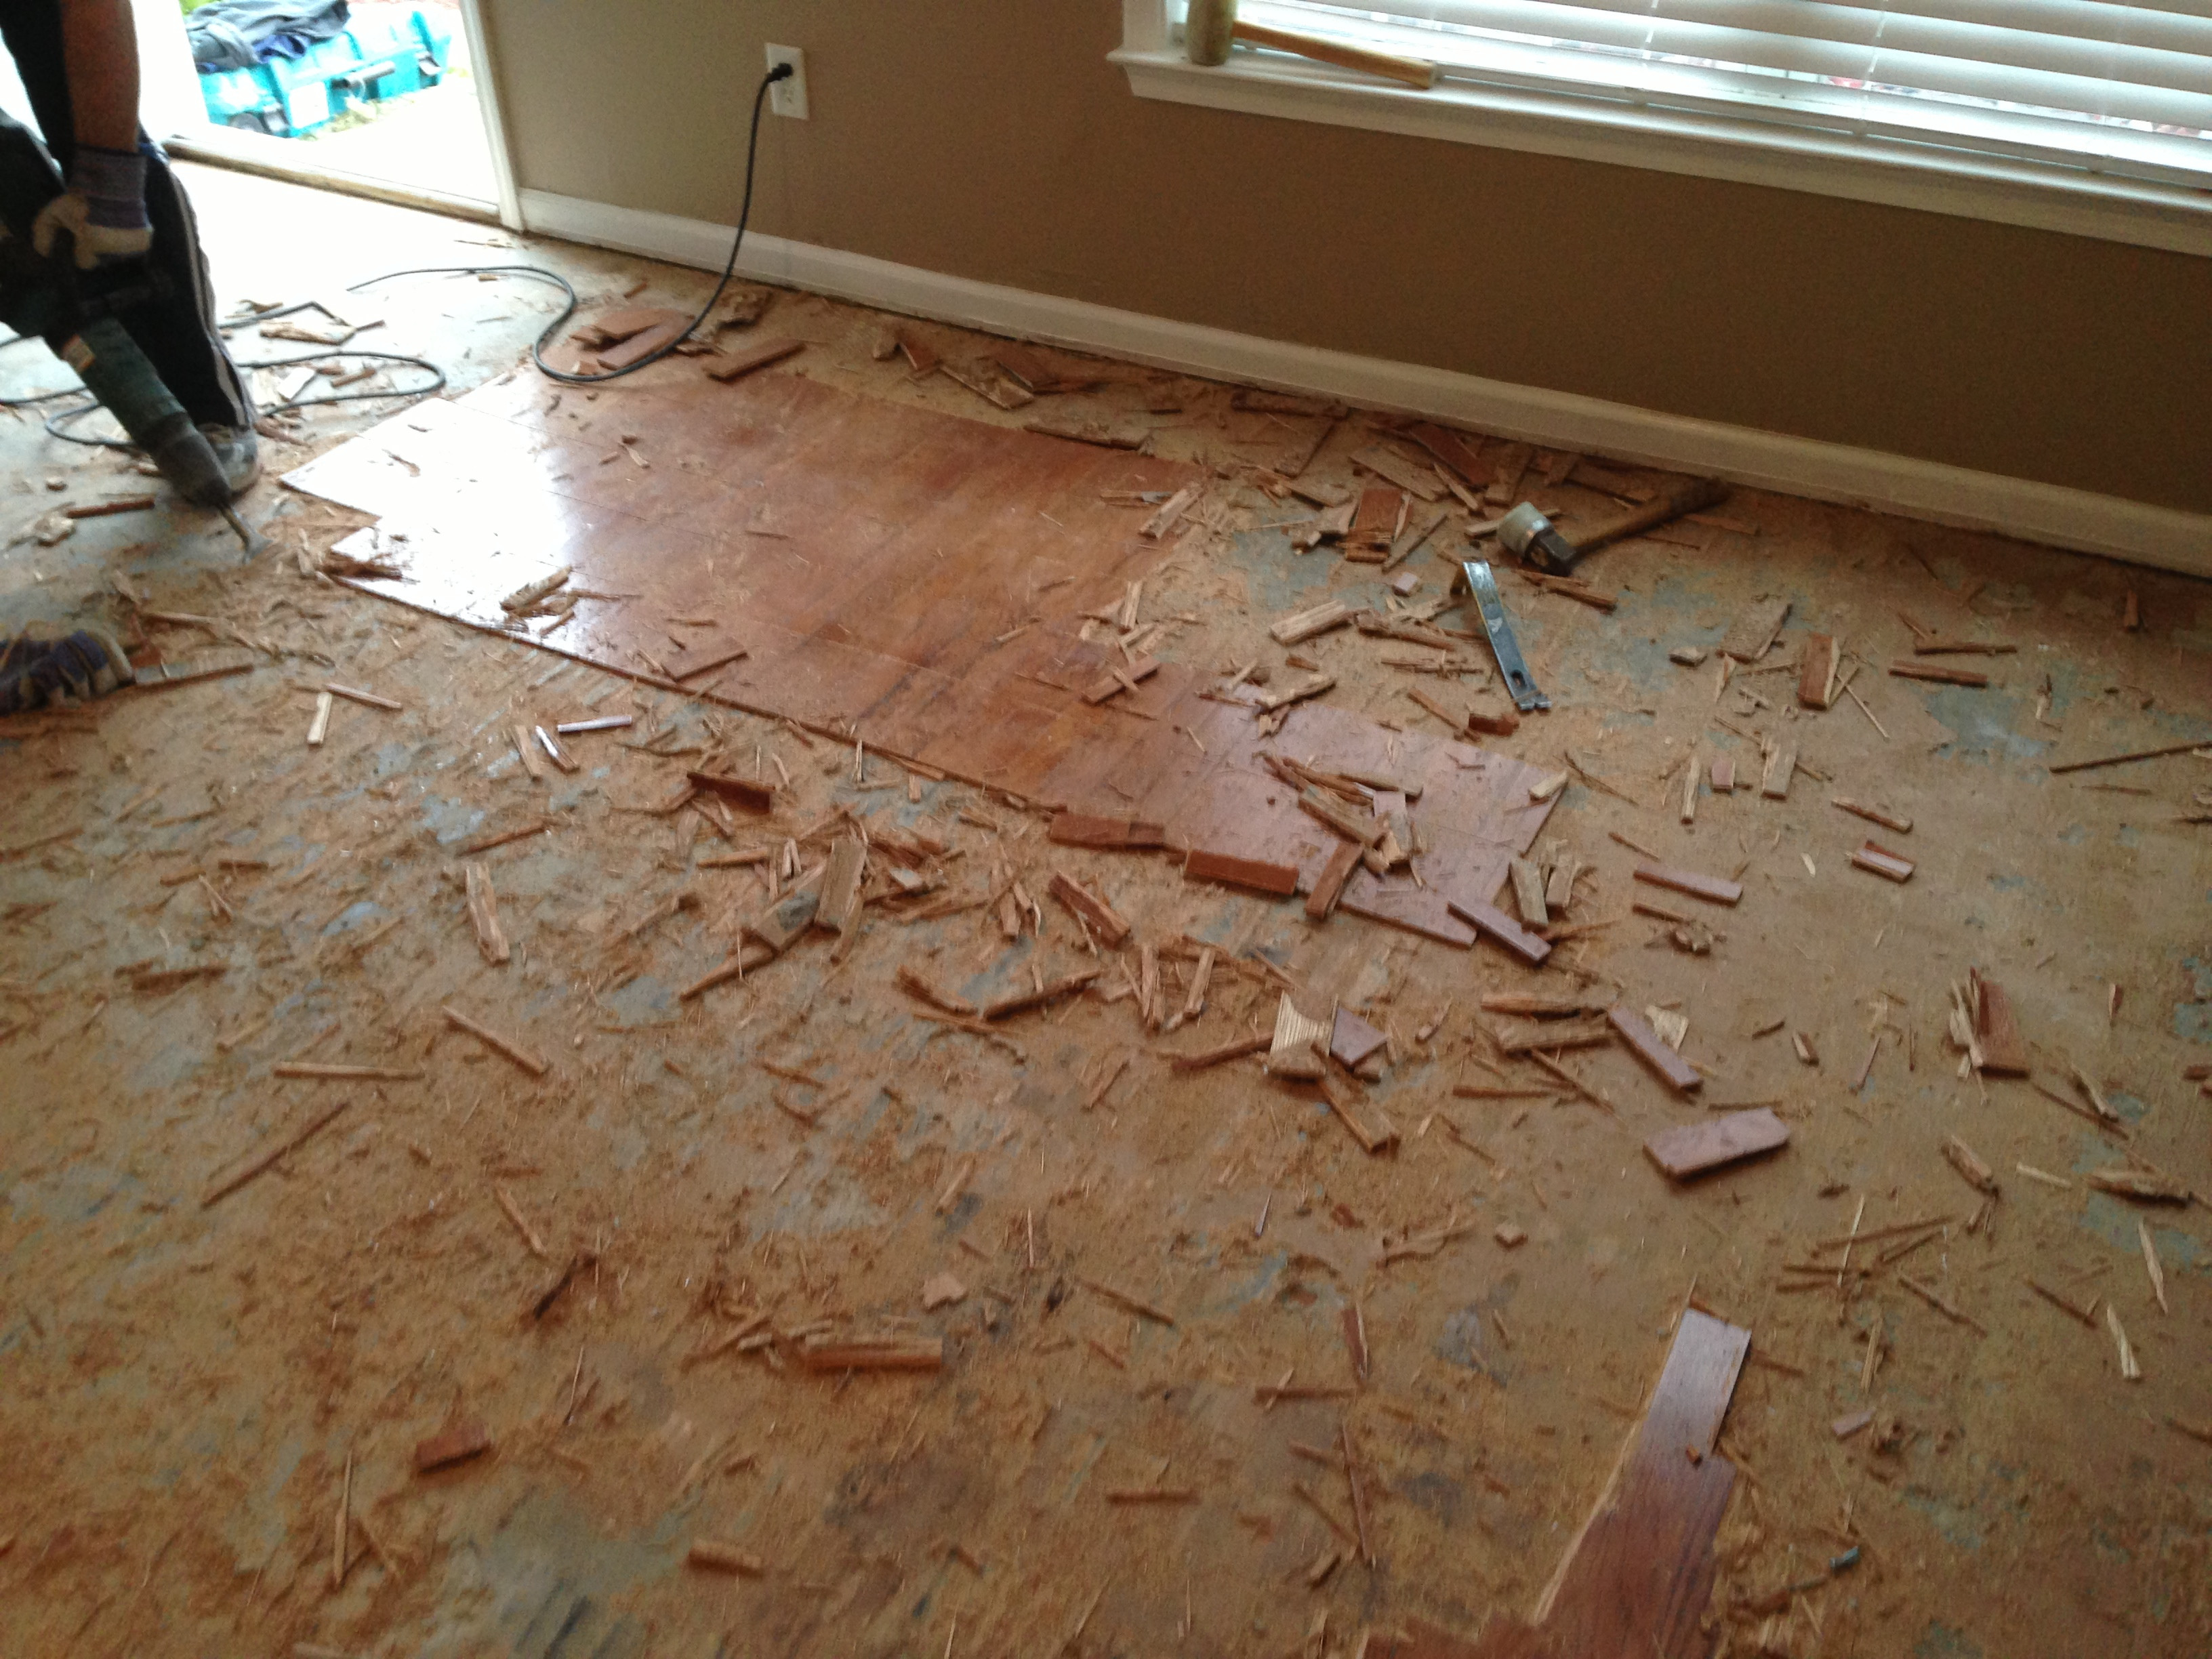 25 Nice How Much Does Restaining Hardwood Floors Cost 2022 free download how much does restaining hardwood floors cost of estimate cost of hardwood floors installed hardwood floor estimator with hardwood floor cost for what is the labor installation decor costco